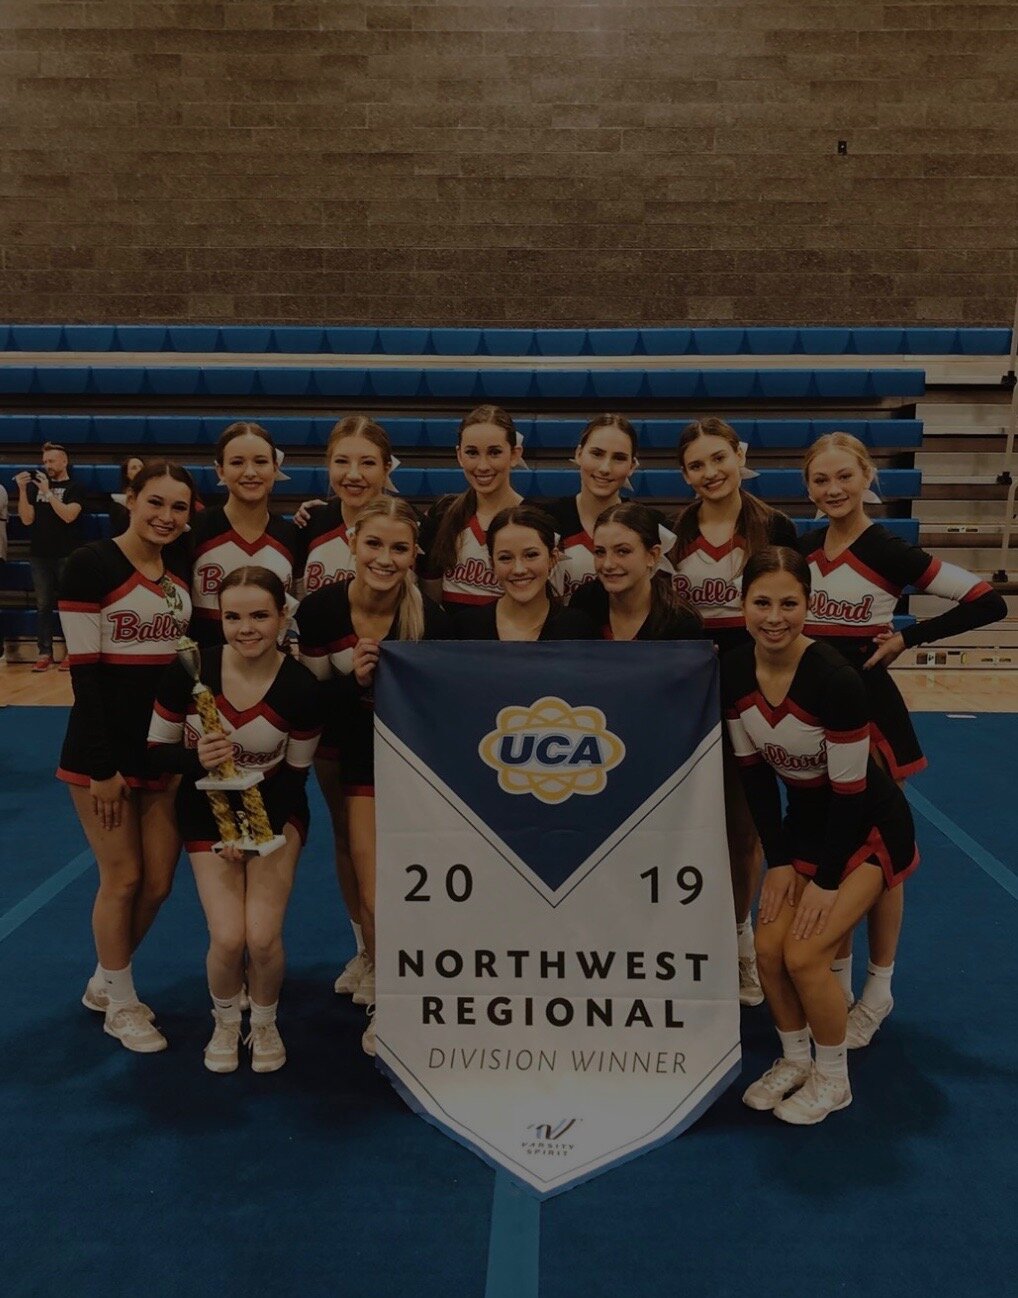 Cheer is heading to nationals for the third year in a row, after winning regionals on Nov. 2. “A lot of preparation goes into the two minutes and 30 seconds we spend on the met,” senior Mclaren Hadley said. (Courtesy of Samantha Burnstead)